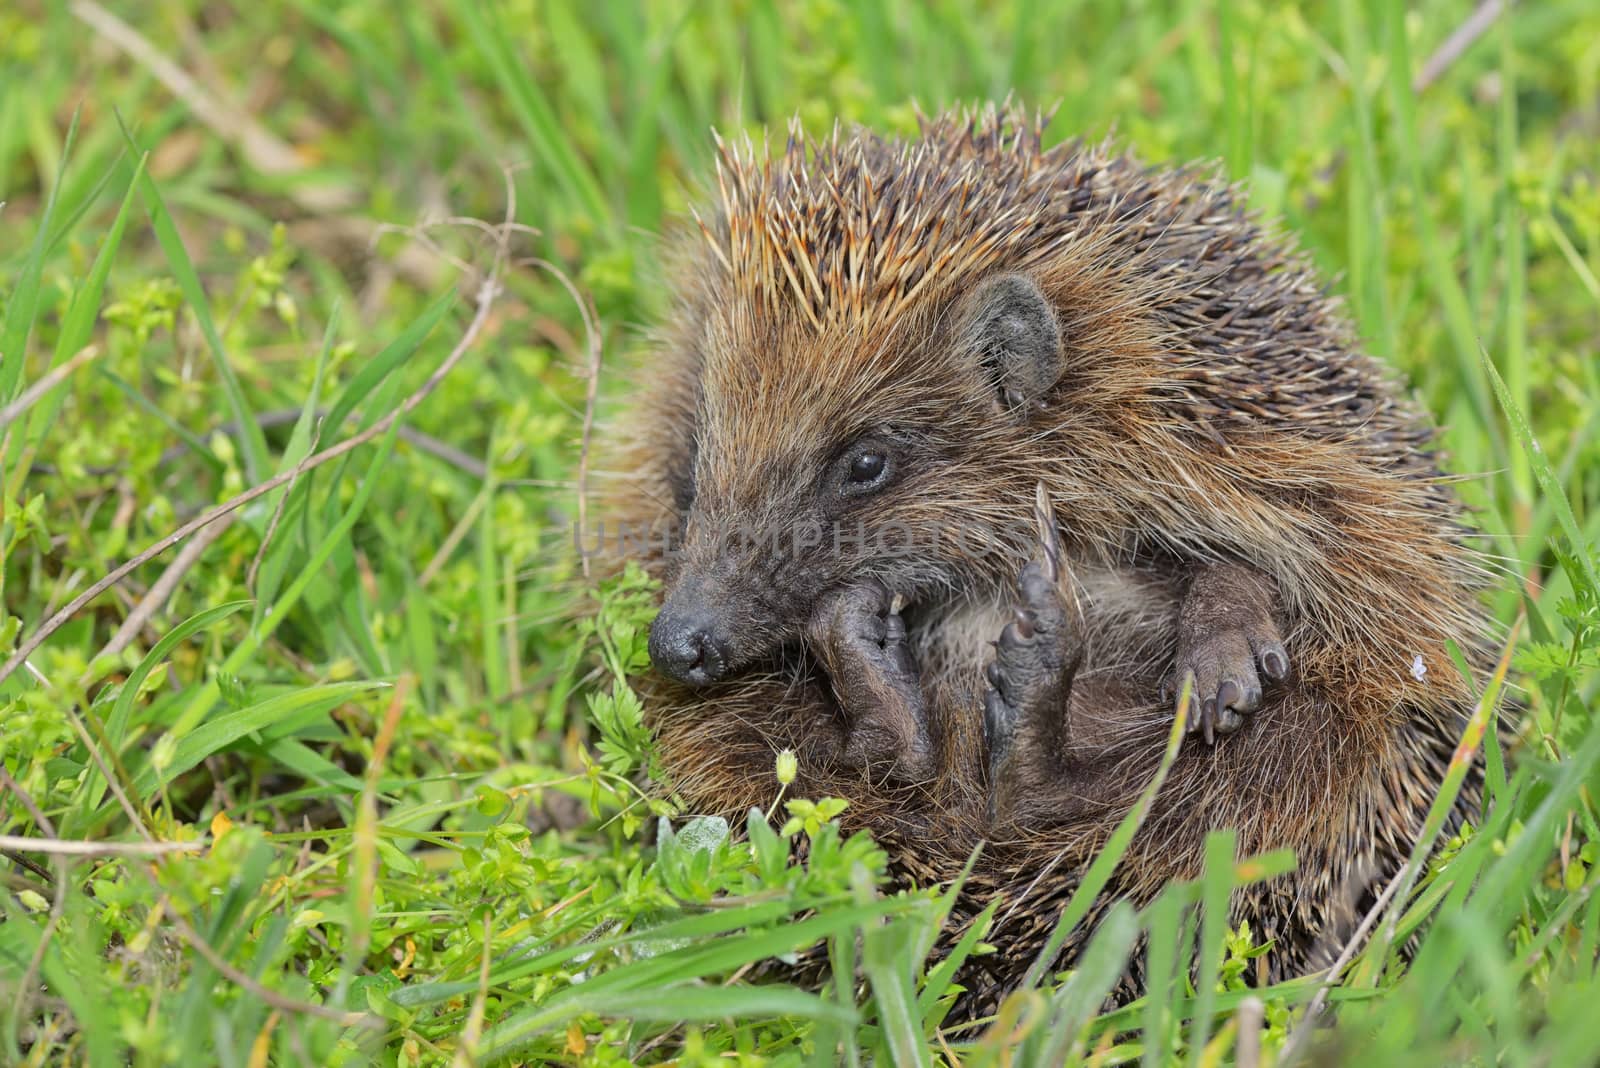 Young european hedgehog in grass